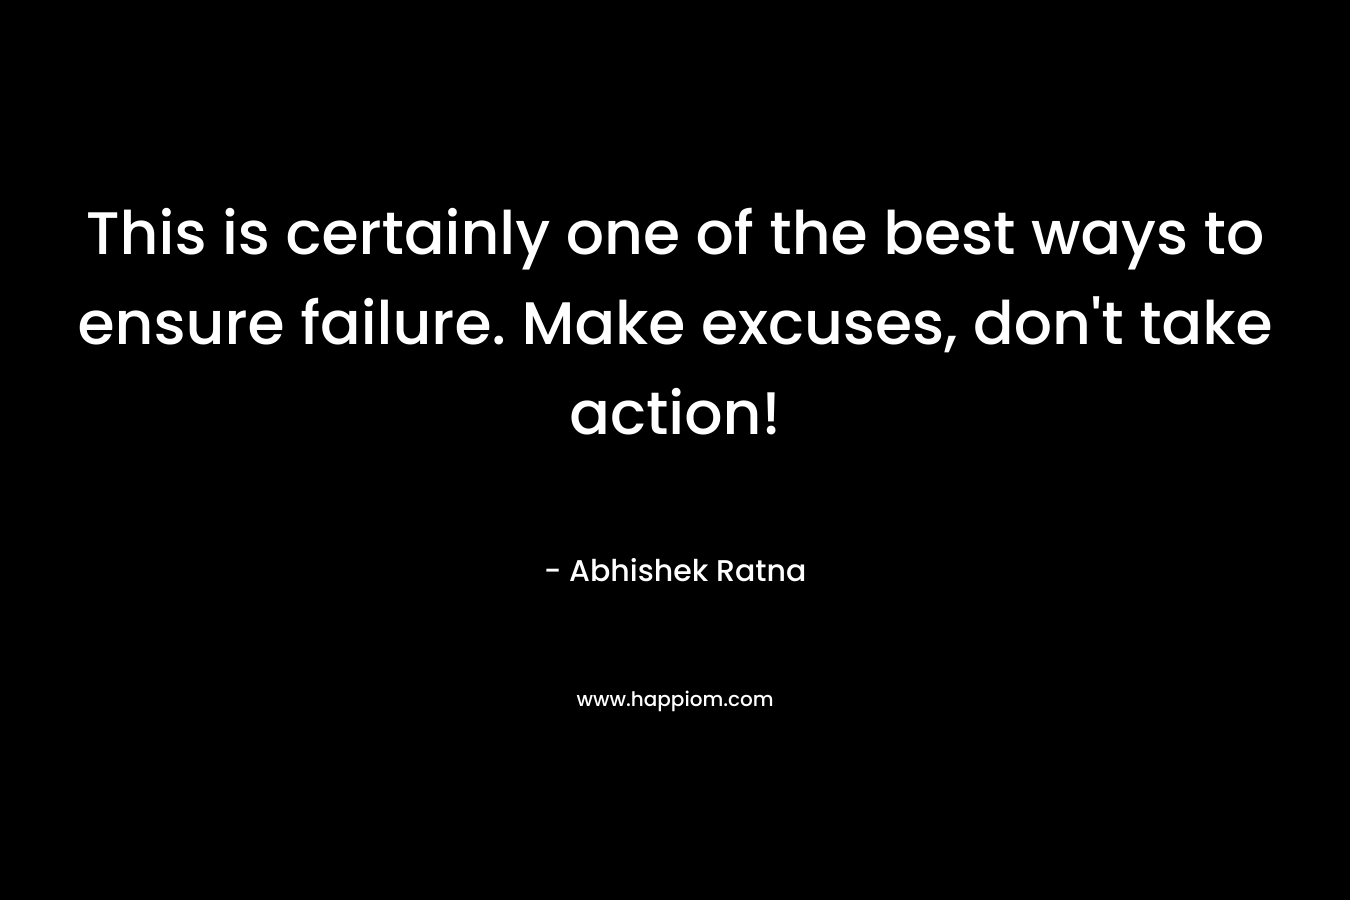 This is certainly one of the best ways to ensure failure. Make excuses, don't take action!